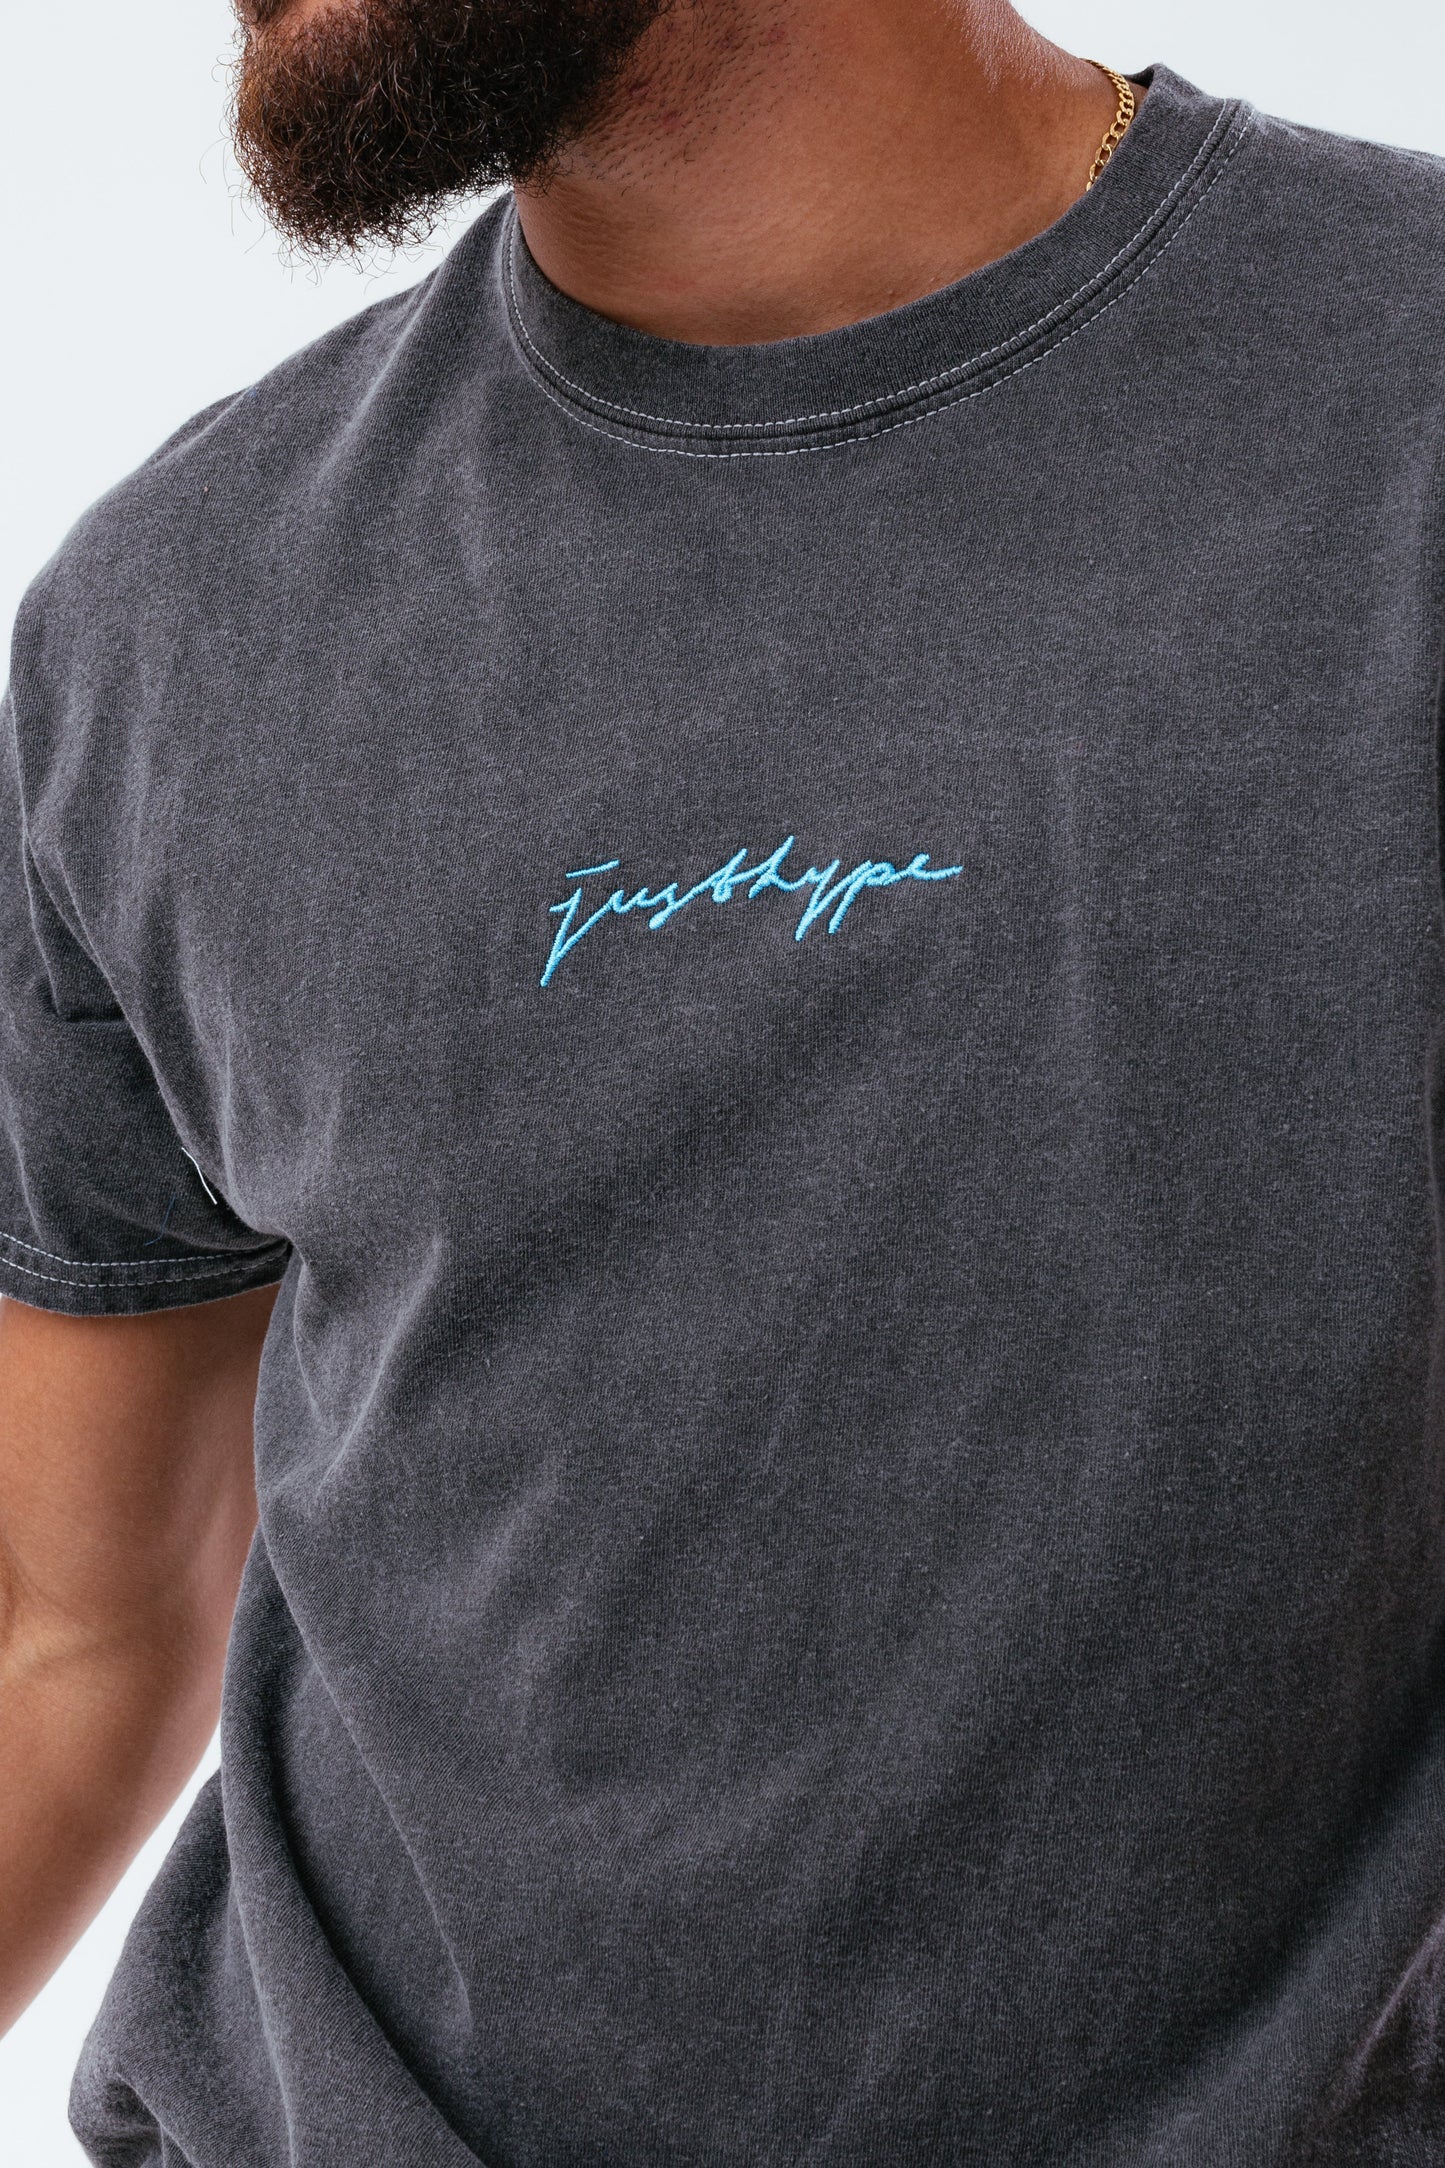 HYPE WASHED GREY SCRIBBLE LOGO EMBROIDERY MEN'S T-SHIRT